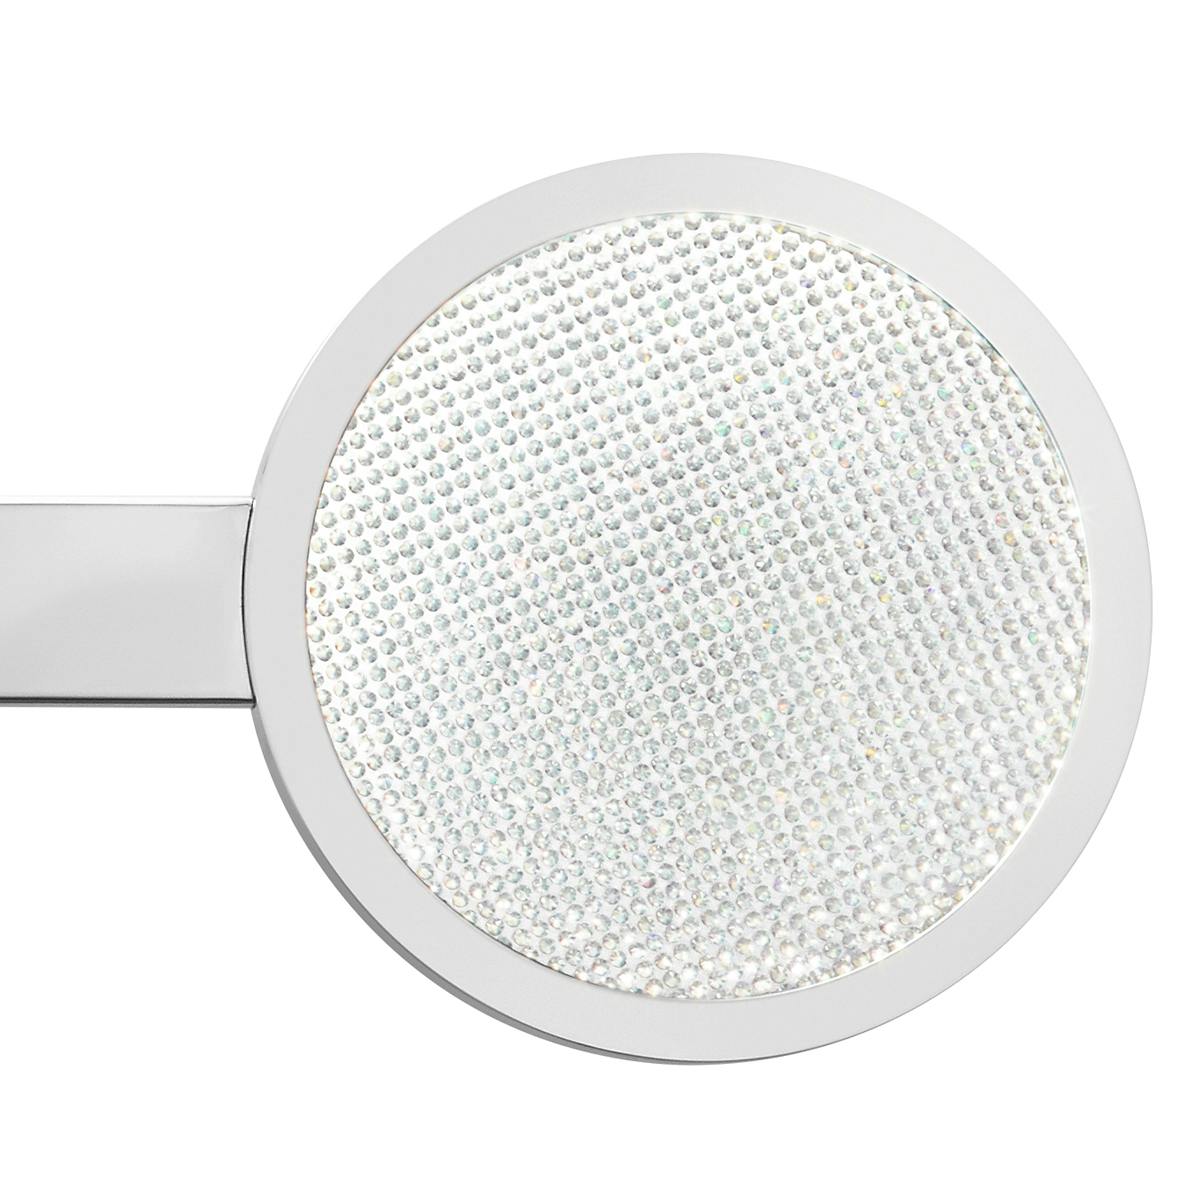 Close up view of the Delaine 3000K 4 Light Vanity Light Chrome on a white background